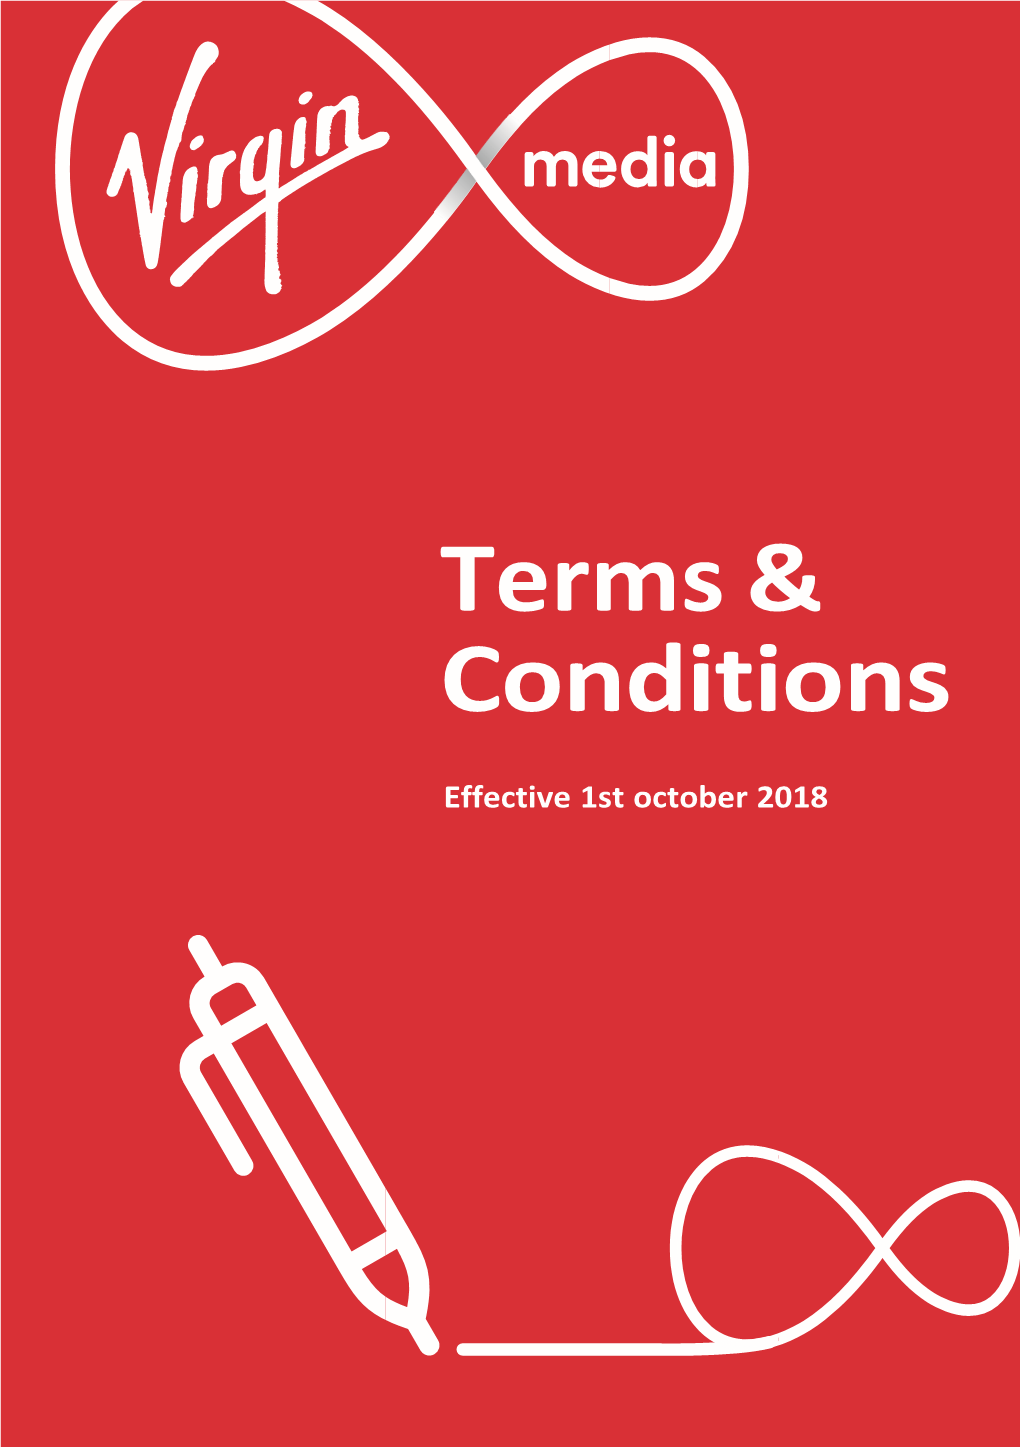 Virgin Media's General Terms and Conditions